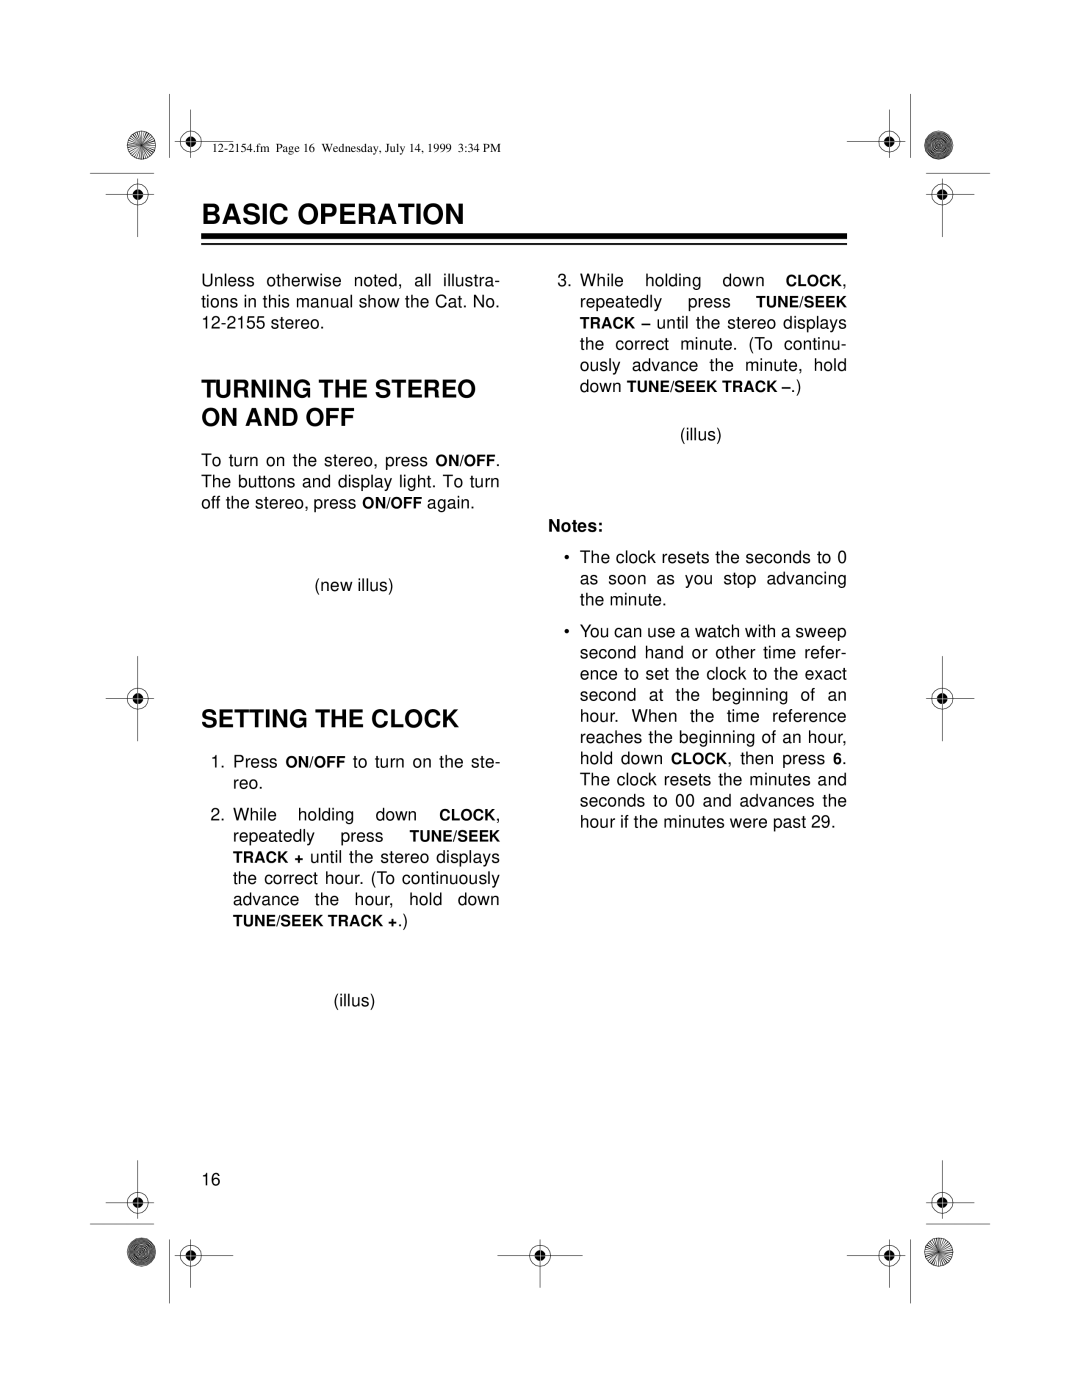 Optimus 12-2155, 12-2154 owner manual Basic Operation, Turning the Stereo on and OFF, Setting the Clock 